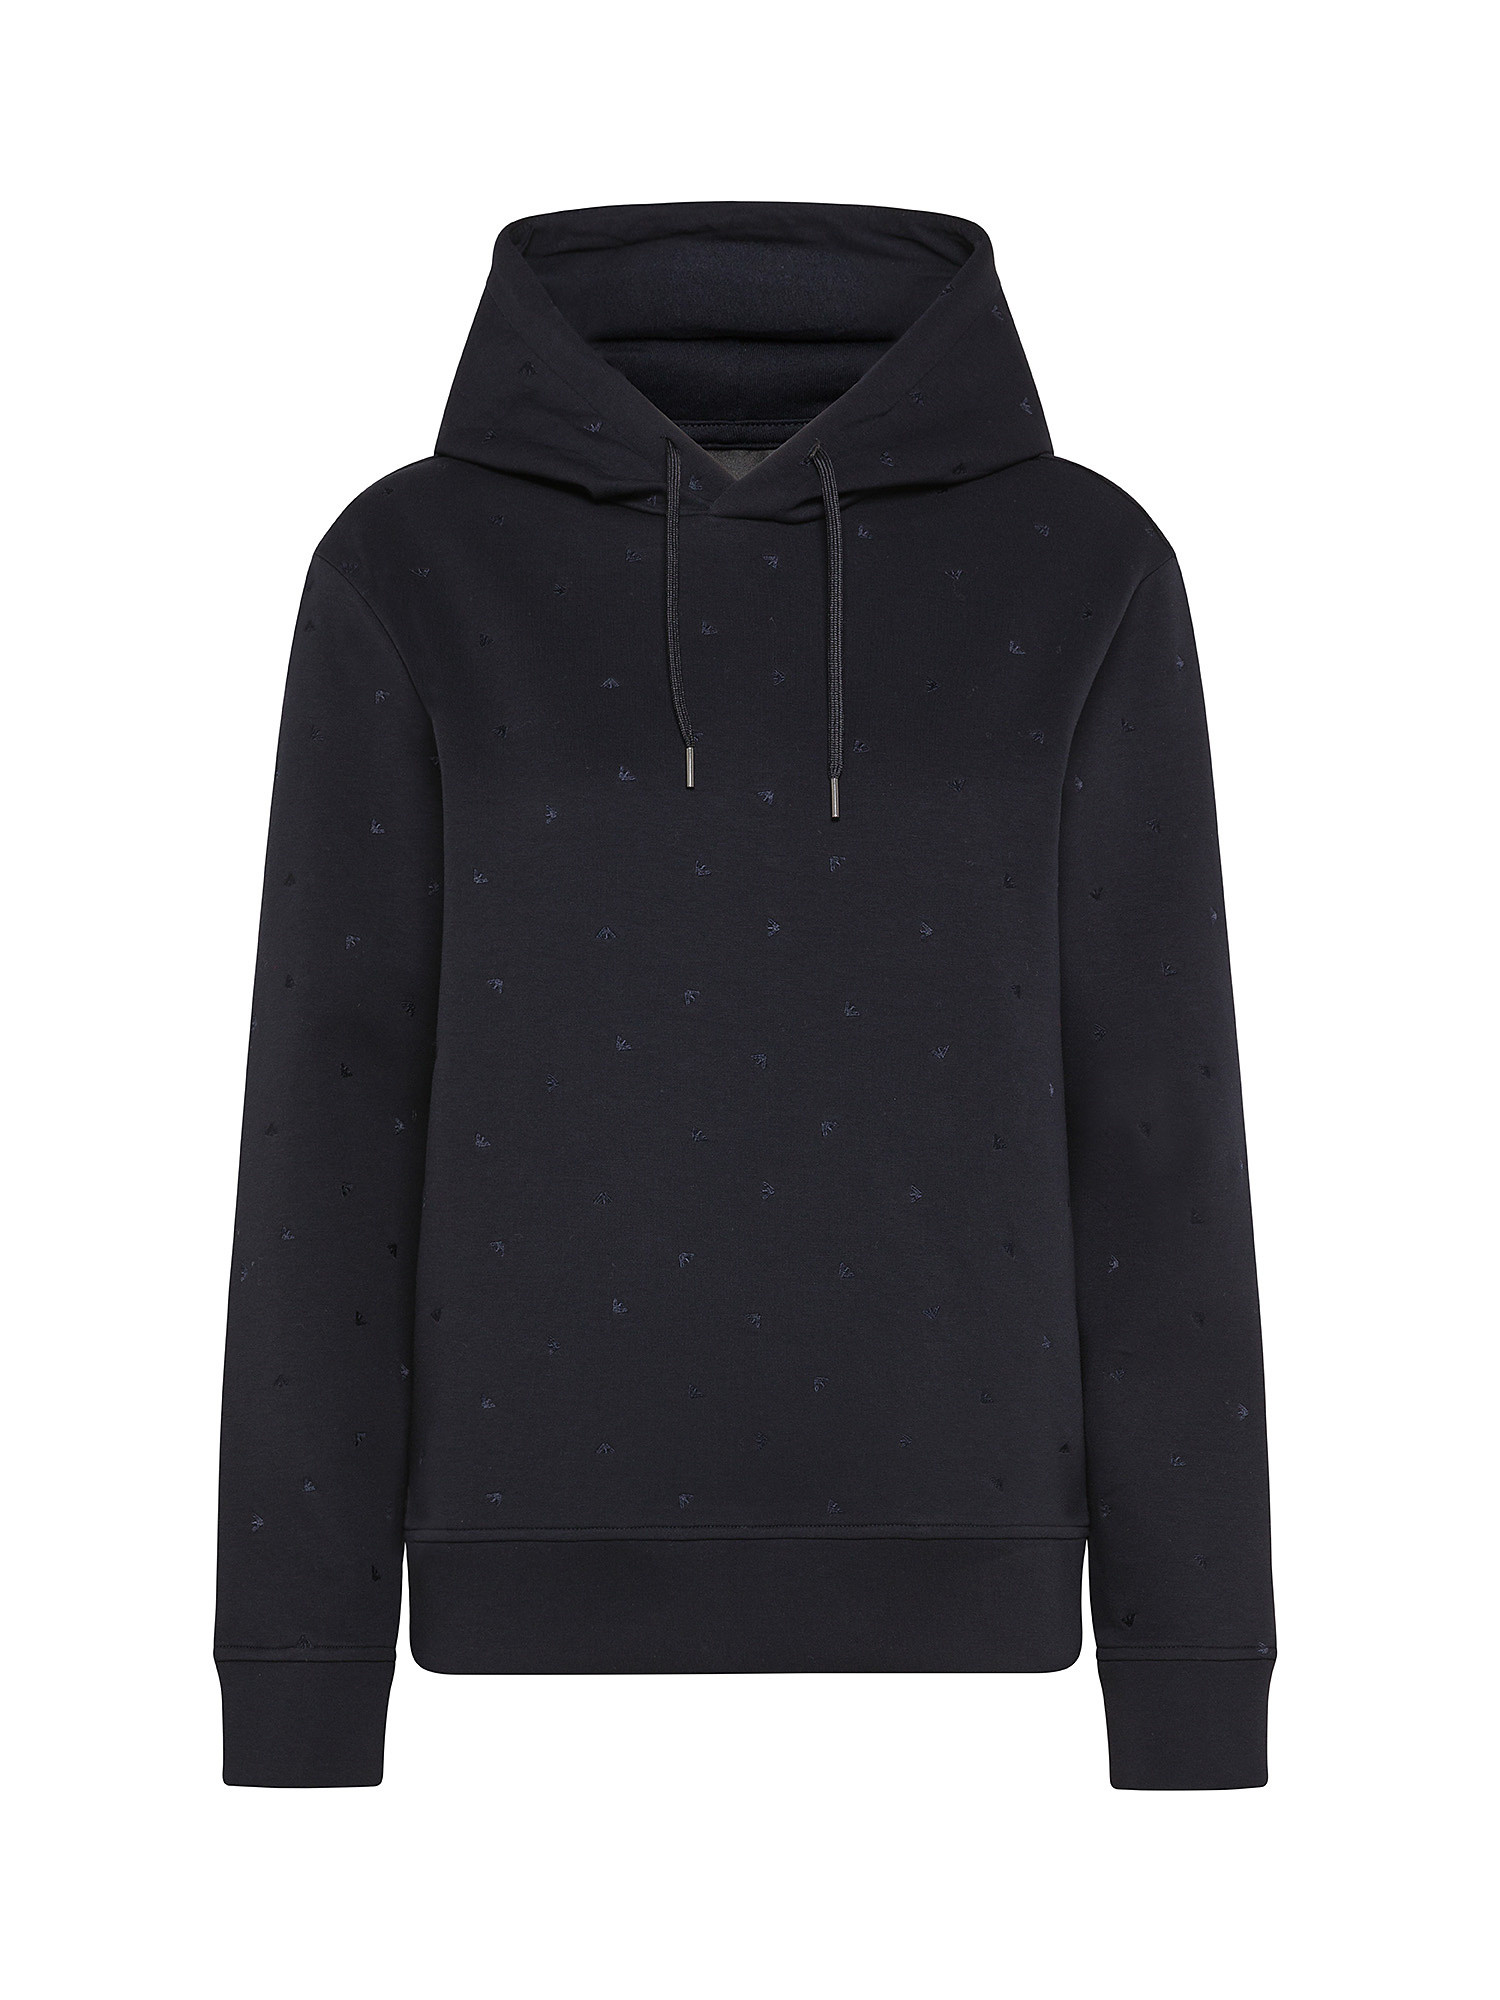 Emporio Armani - Hooded sweatshirt with all-over eagle logo embroidery., Dark Blue, large image number 0